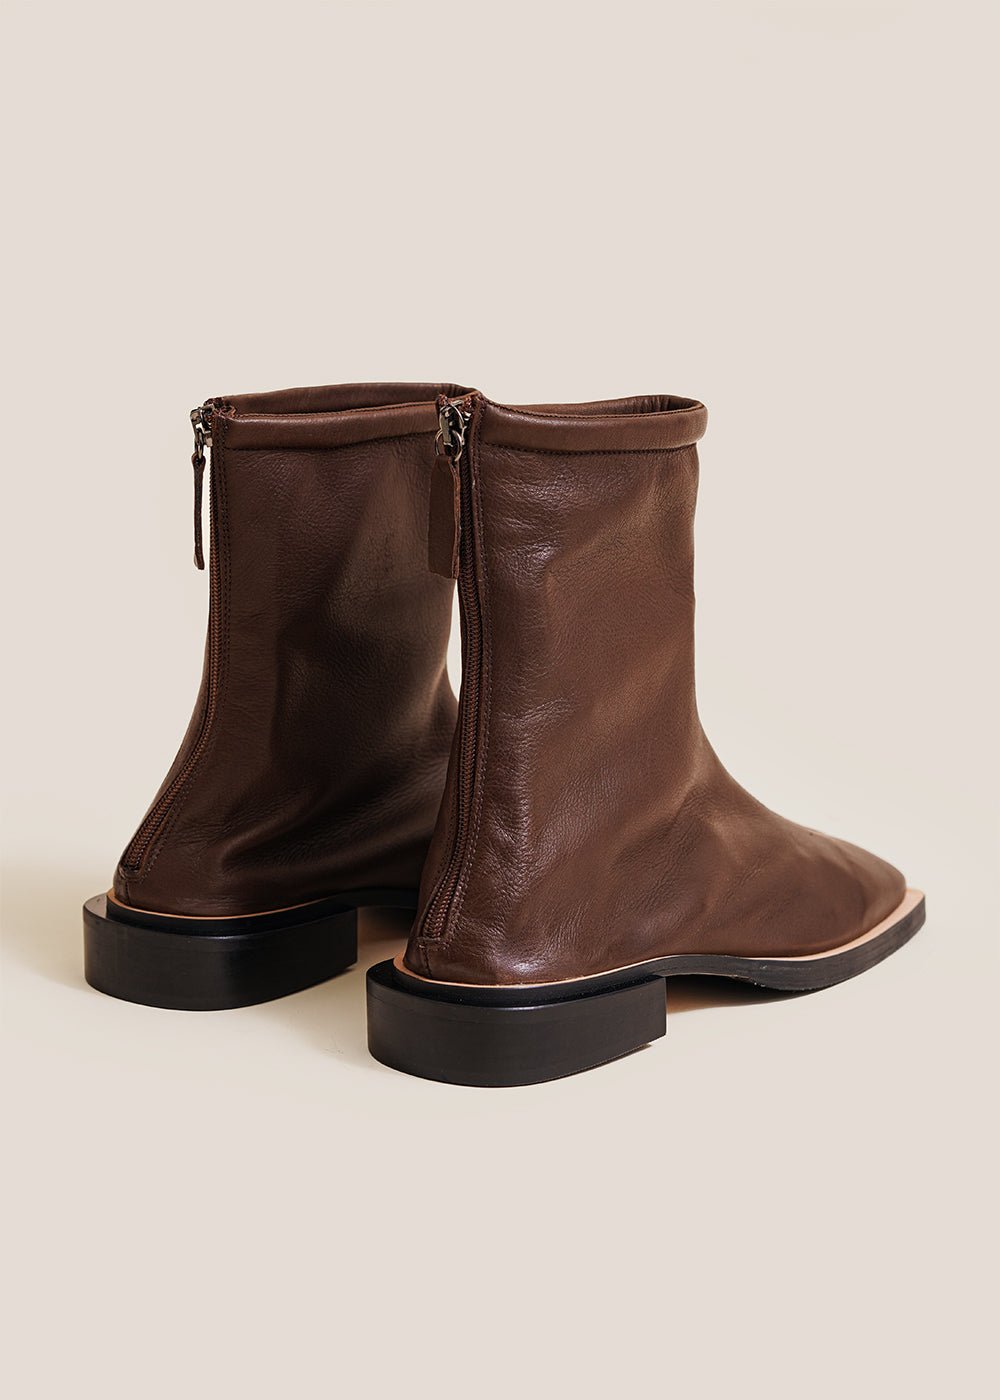 About Arianne Caoba Dean Boots - New Classics Studios Sustainable Ethical Fashion Canada